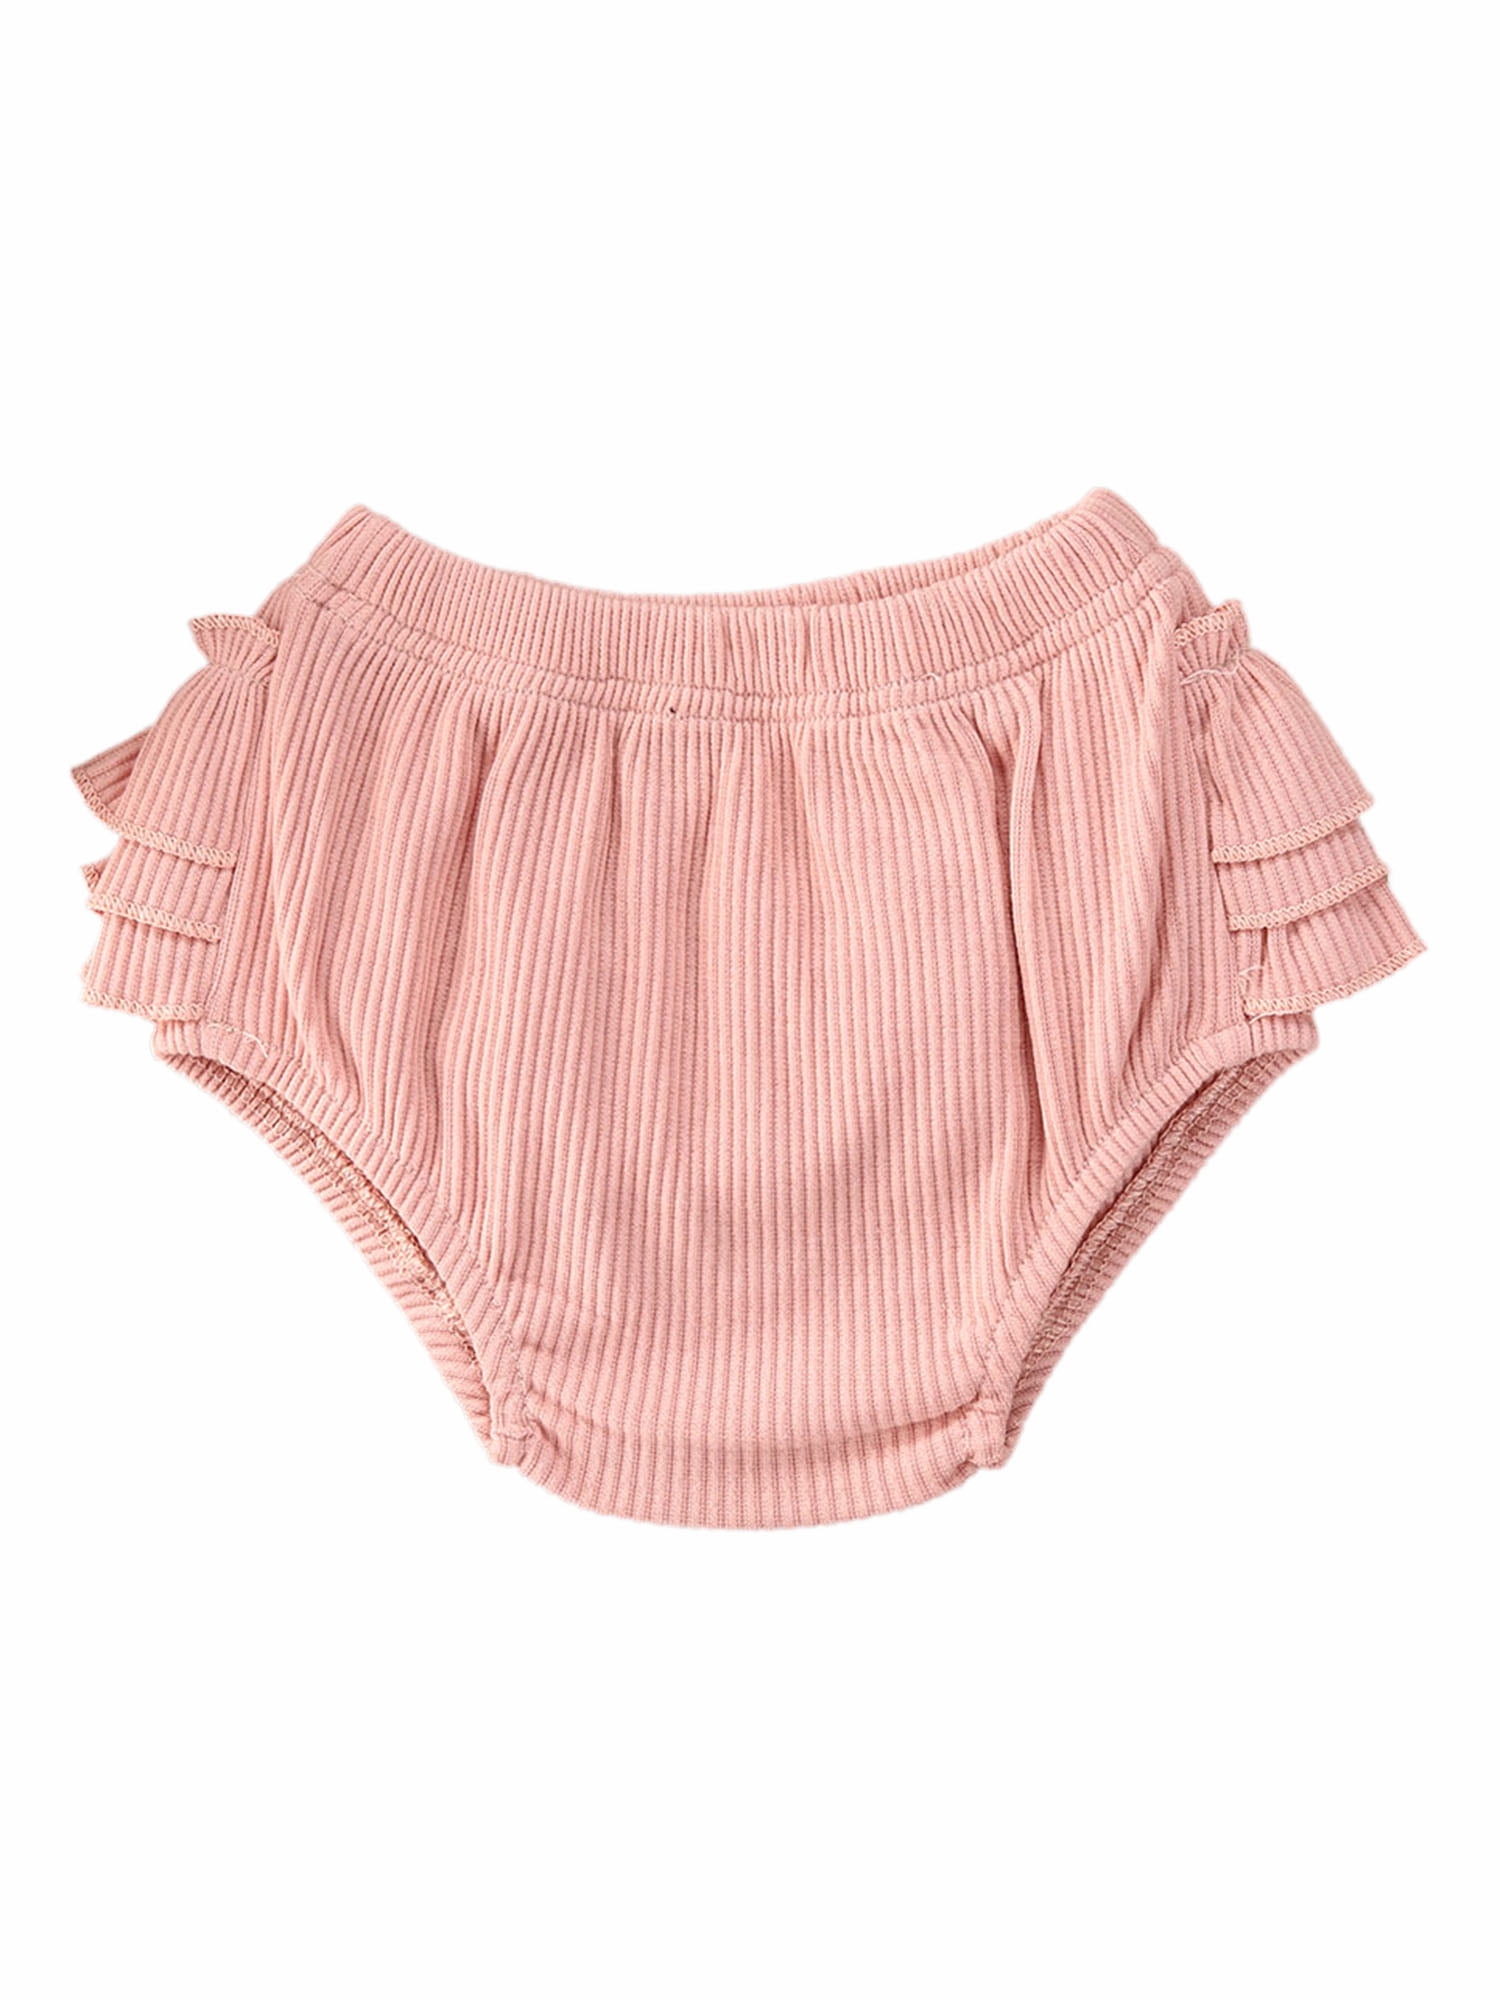 Baby Girl Shorts Floral/Plain Ribbed Bloomers Pants Ruffle Diaper Cover for Newborn Toddler Kids 